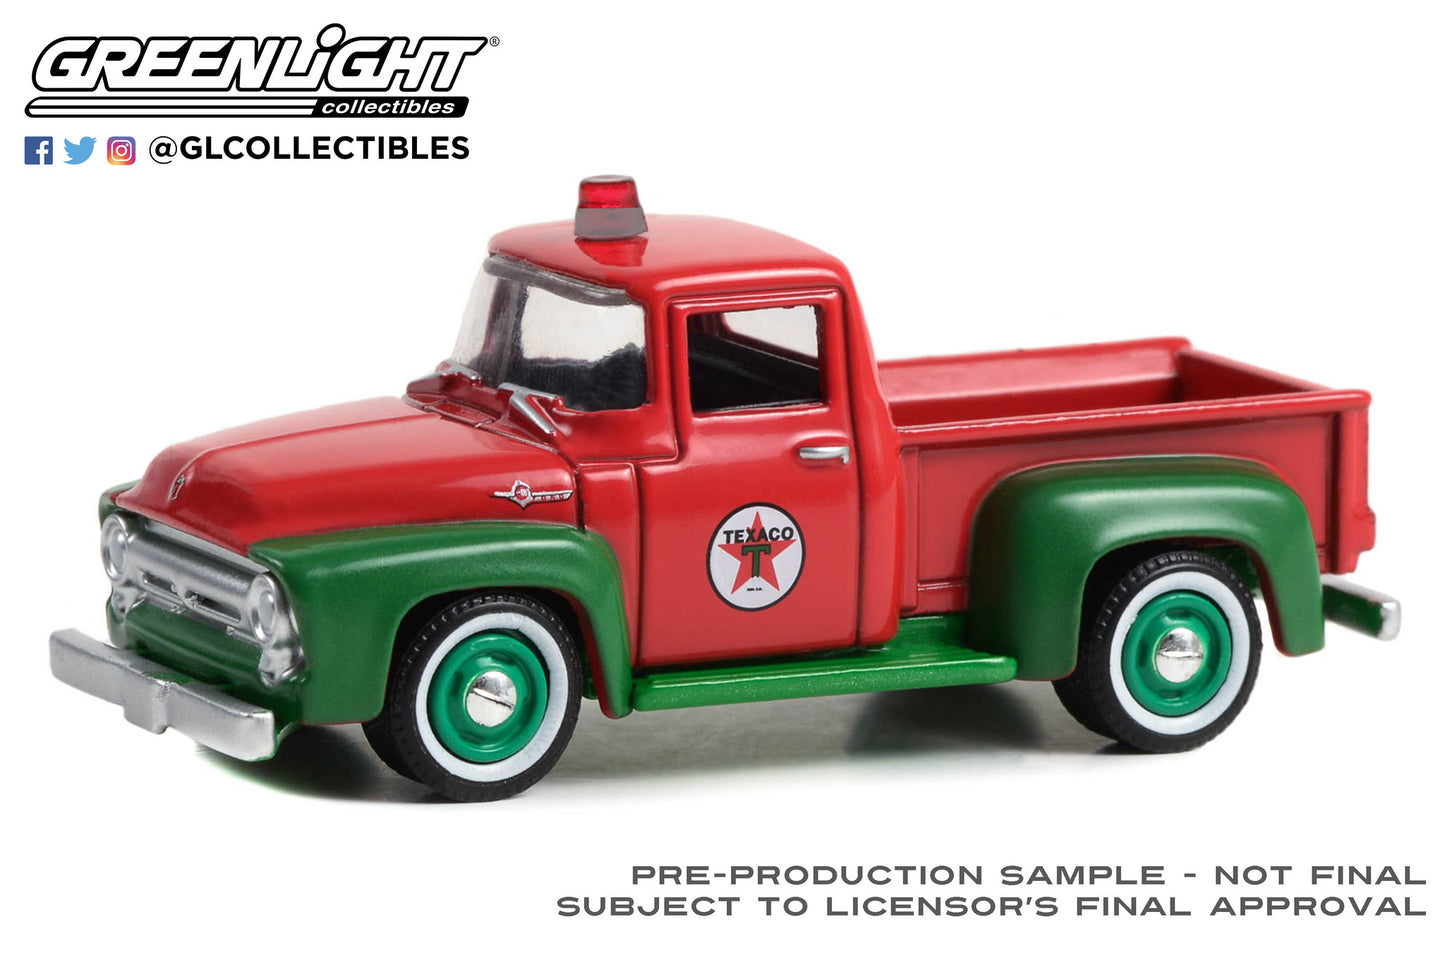 GreenLight 1:64 Anniversary Collection Series 15 - 1954 Ford F-100 - Red and Green - Texaco Celebrating 120 Years 28120-A